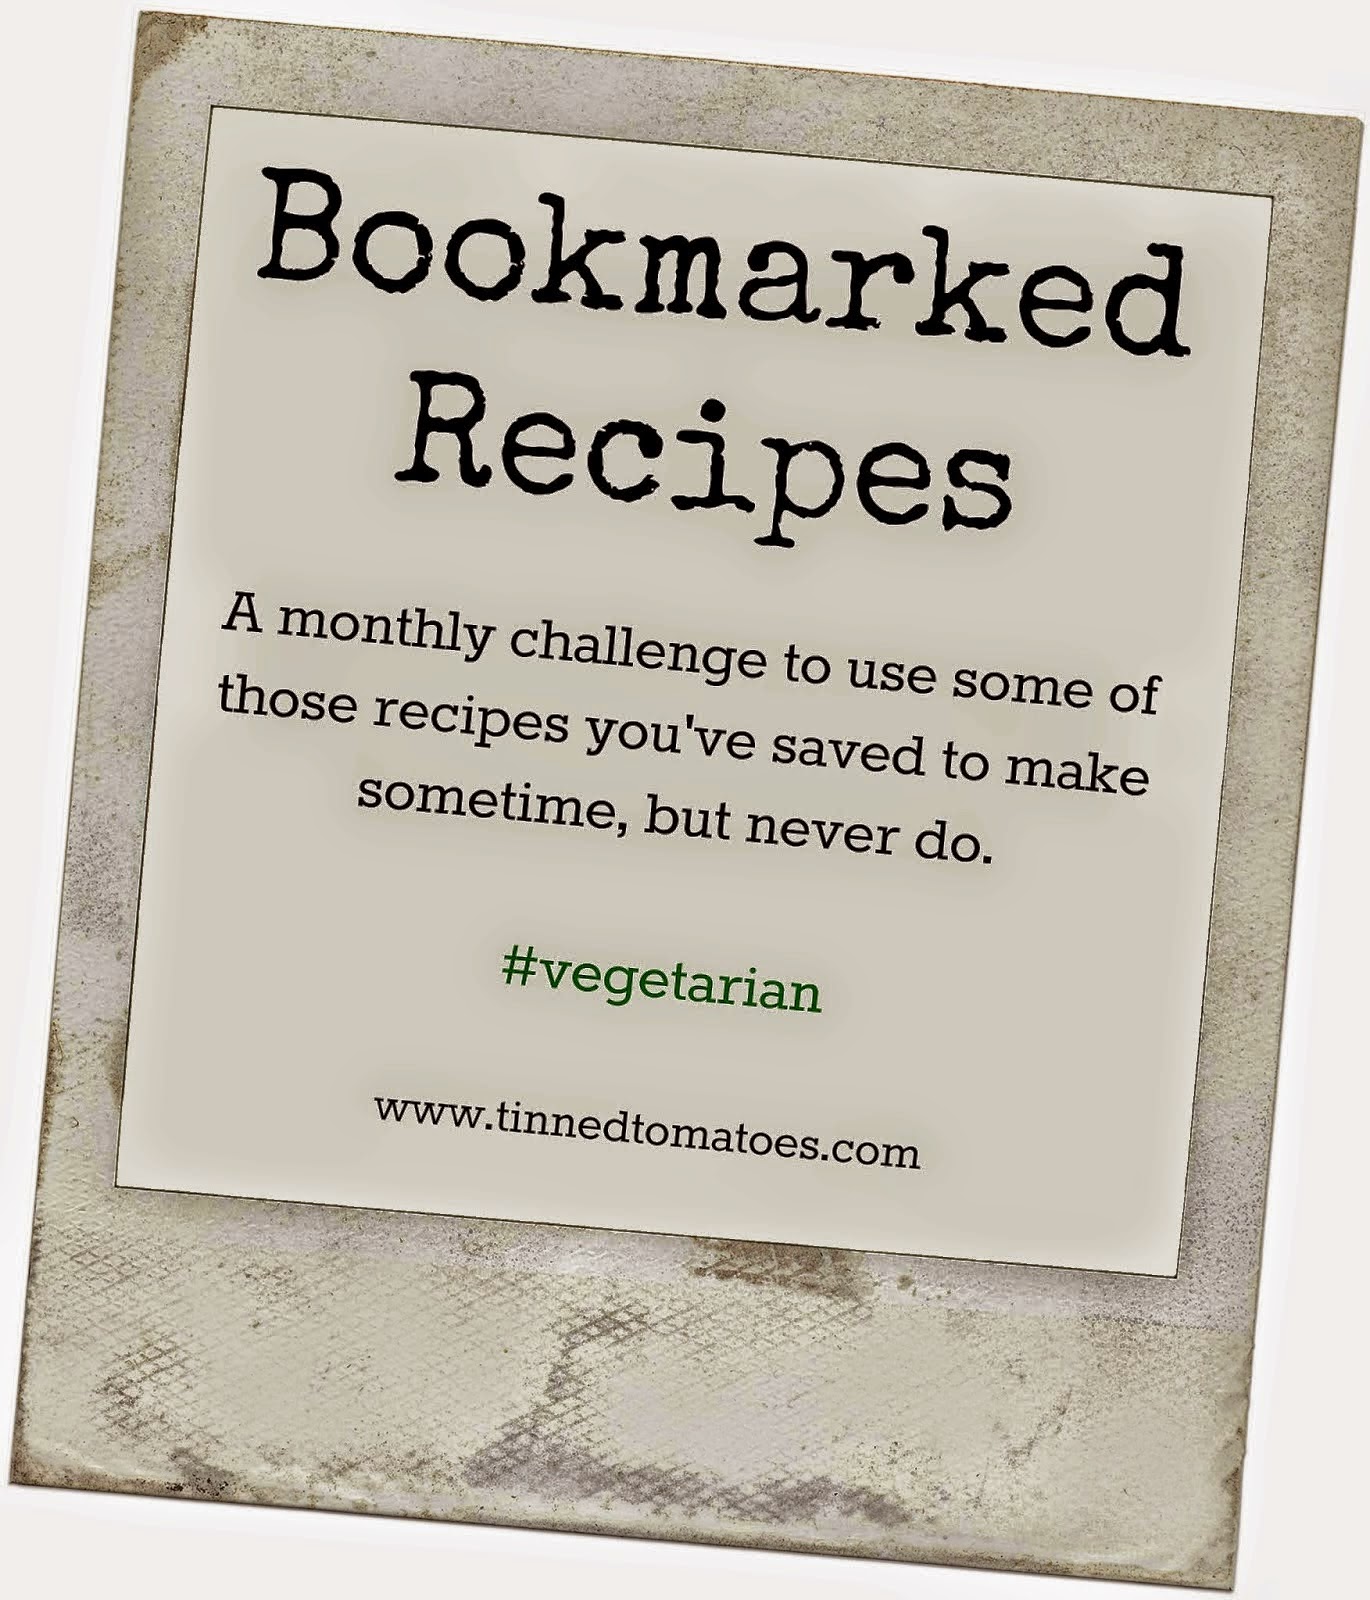 15 Veggie and Vegan Recipes to Bookmark (Bookmarked Recipes) - Tinned Tomatoes